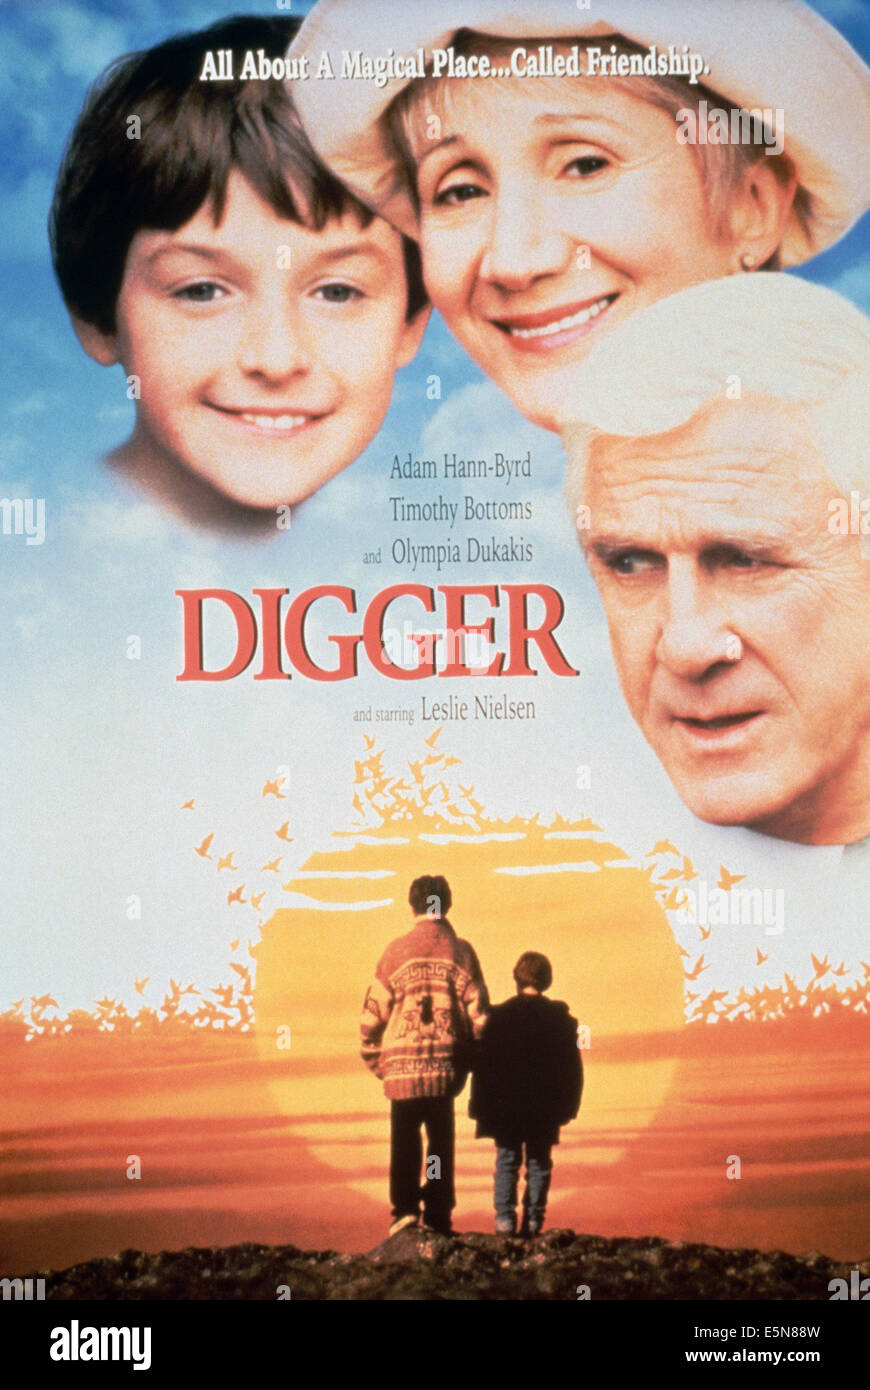 DIGGER, U.S. poster, from left: Adam Hann-Byrd, Olympia Dukakis, Leslie Nielsen, 1993. ©Paramount/courtesy Everett Collection Stock Photo